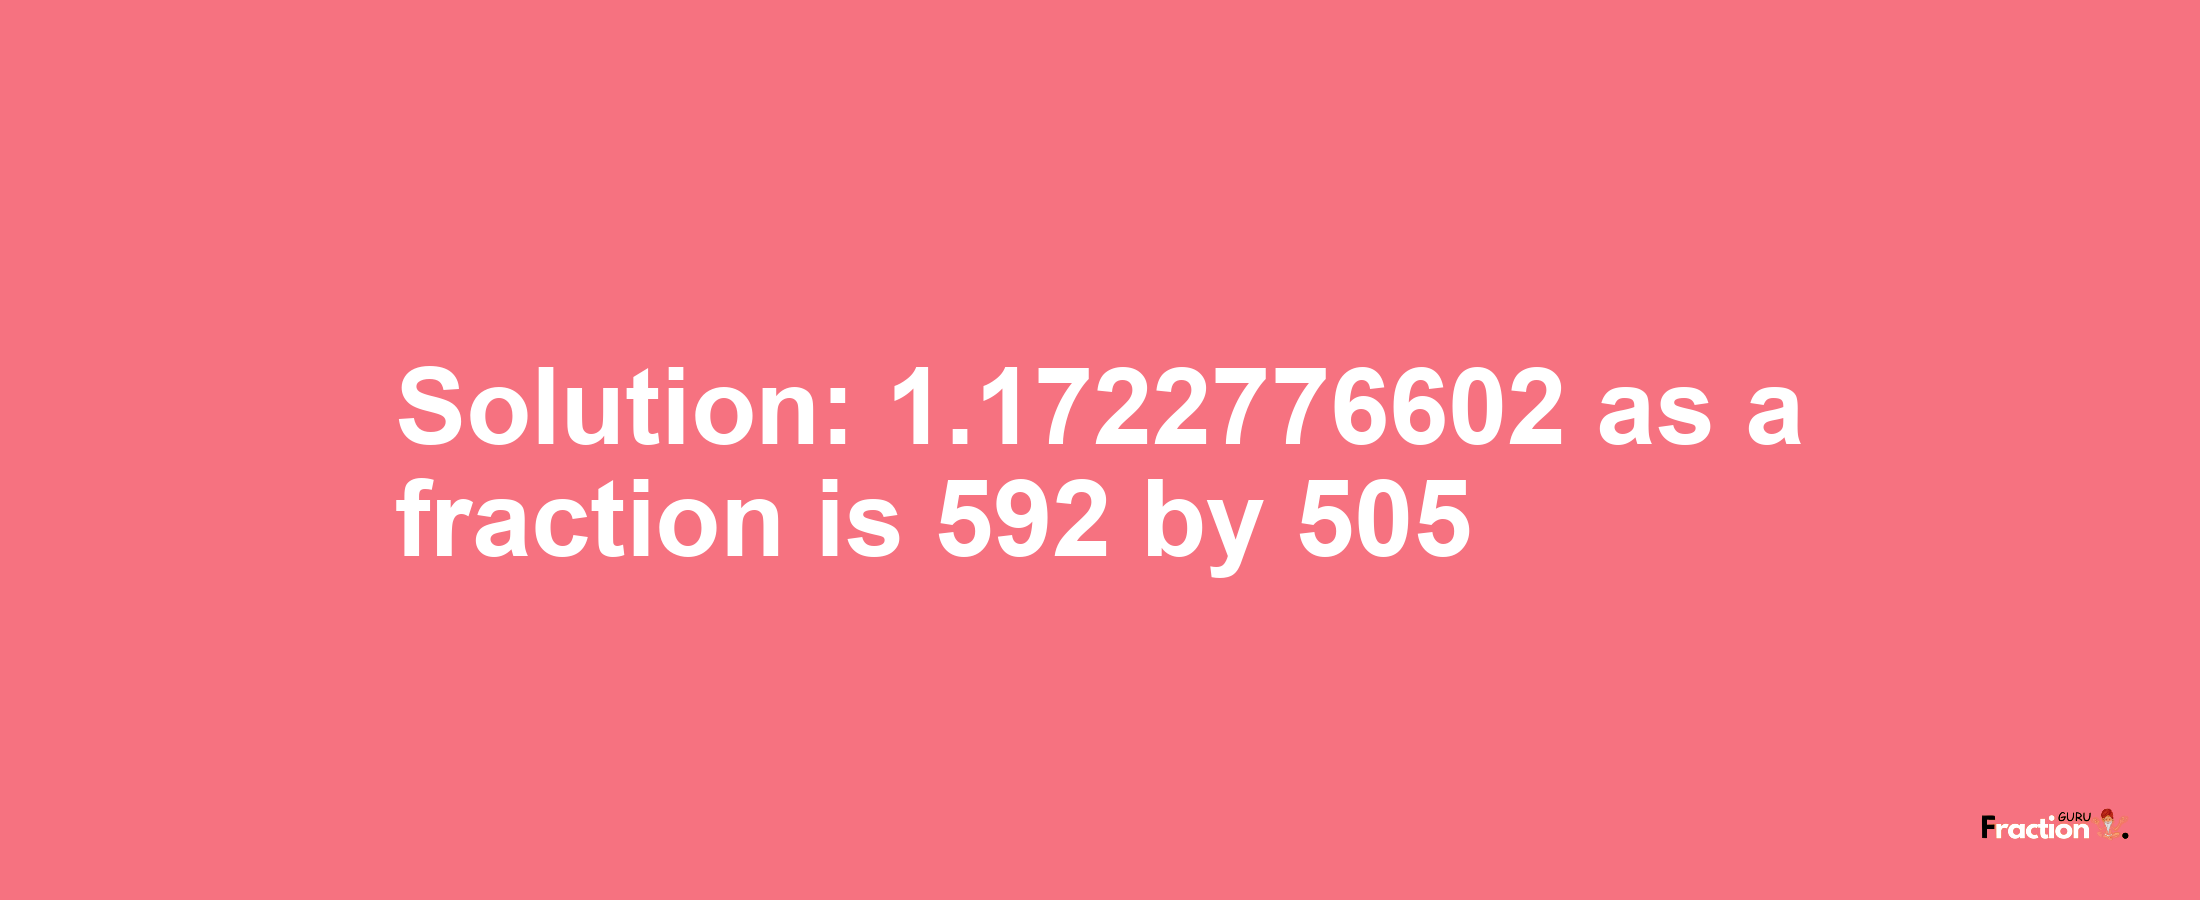 Solution:1.1722776602 as a fraction is 592/505